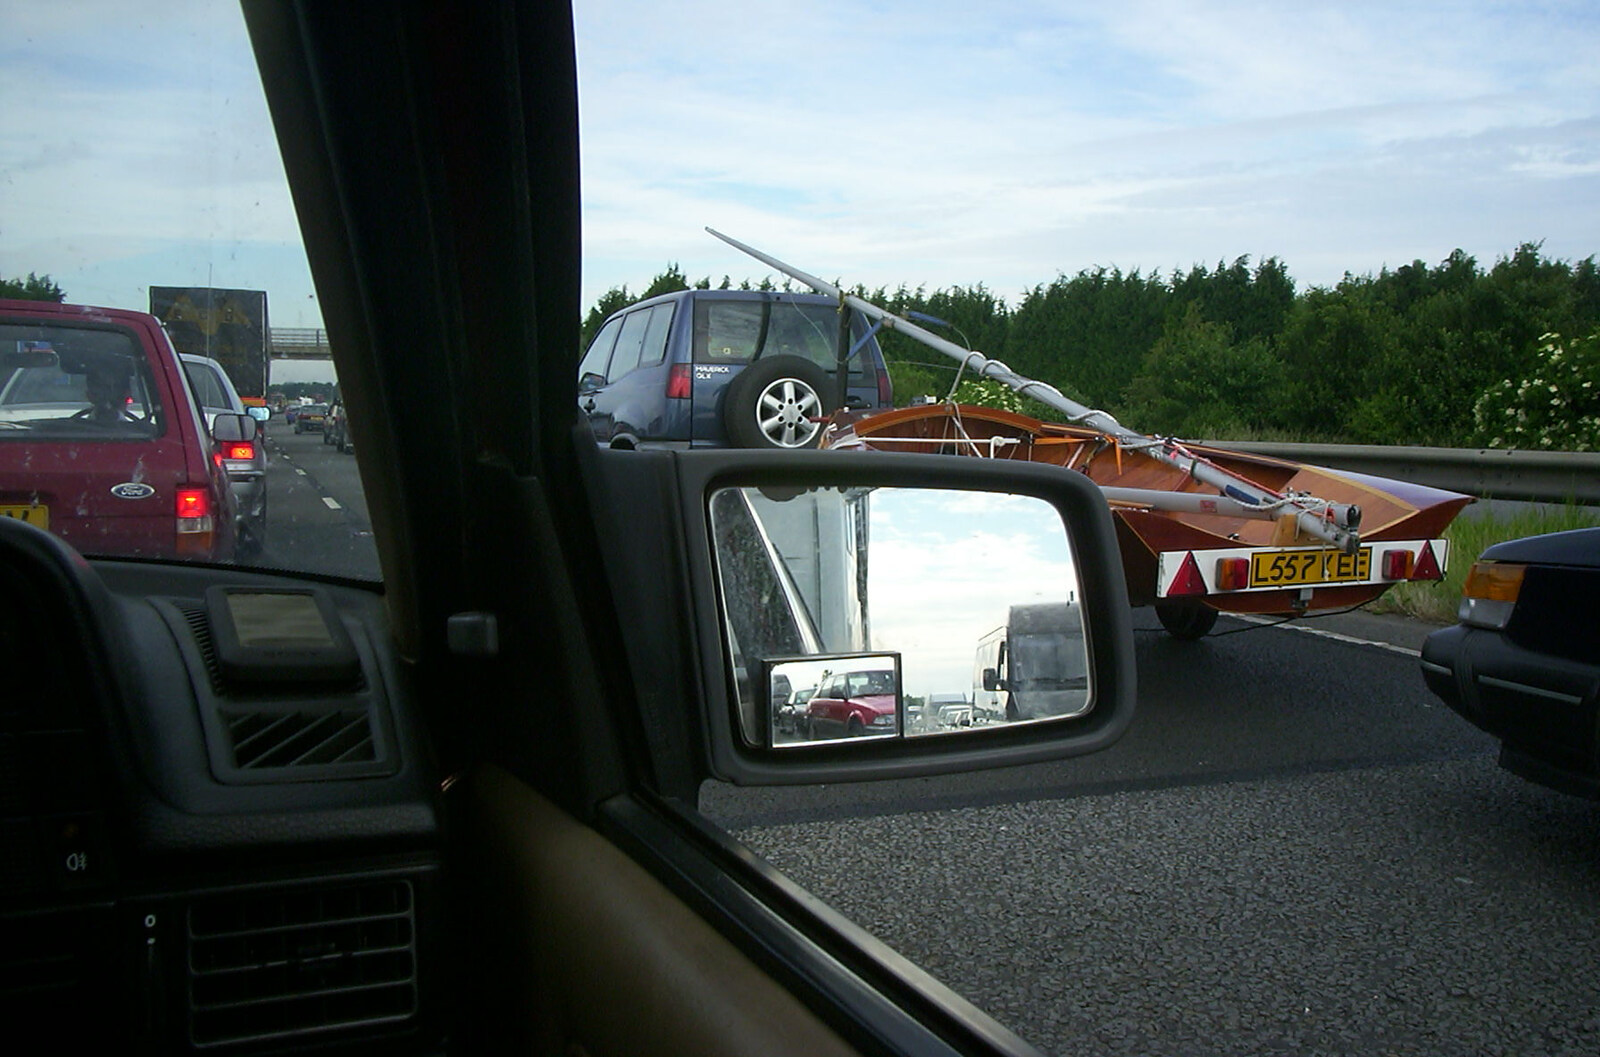 Spammy's Barbeque and A Summer Miscellany - 1st June 2002: Gridlock on the A14